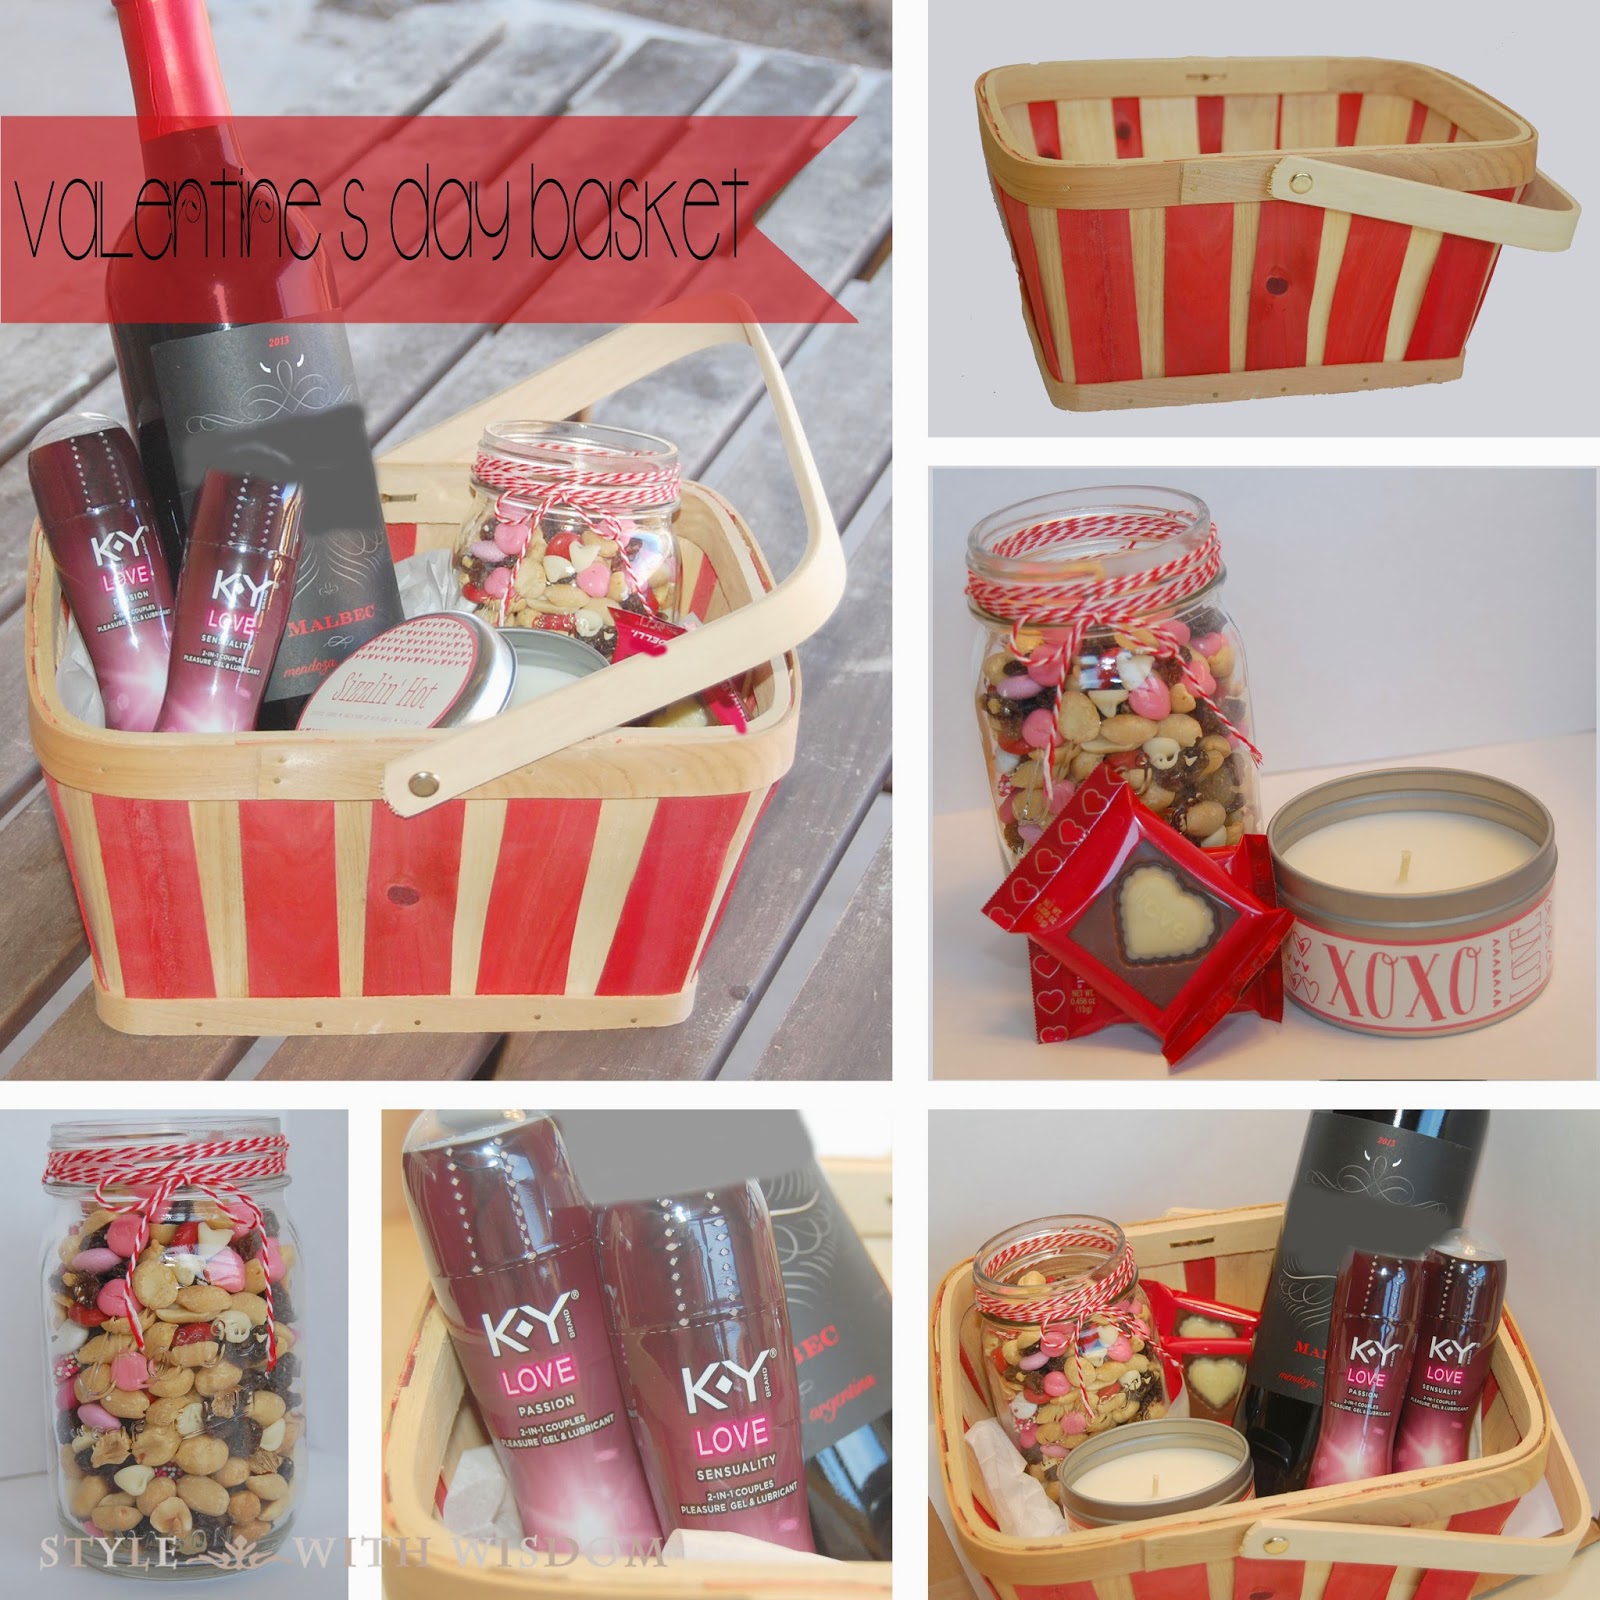 Style with Wisdom The Perfect Valentine's Day Gift Basket!